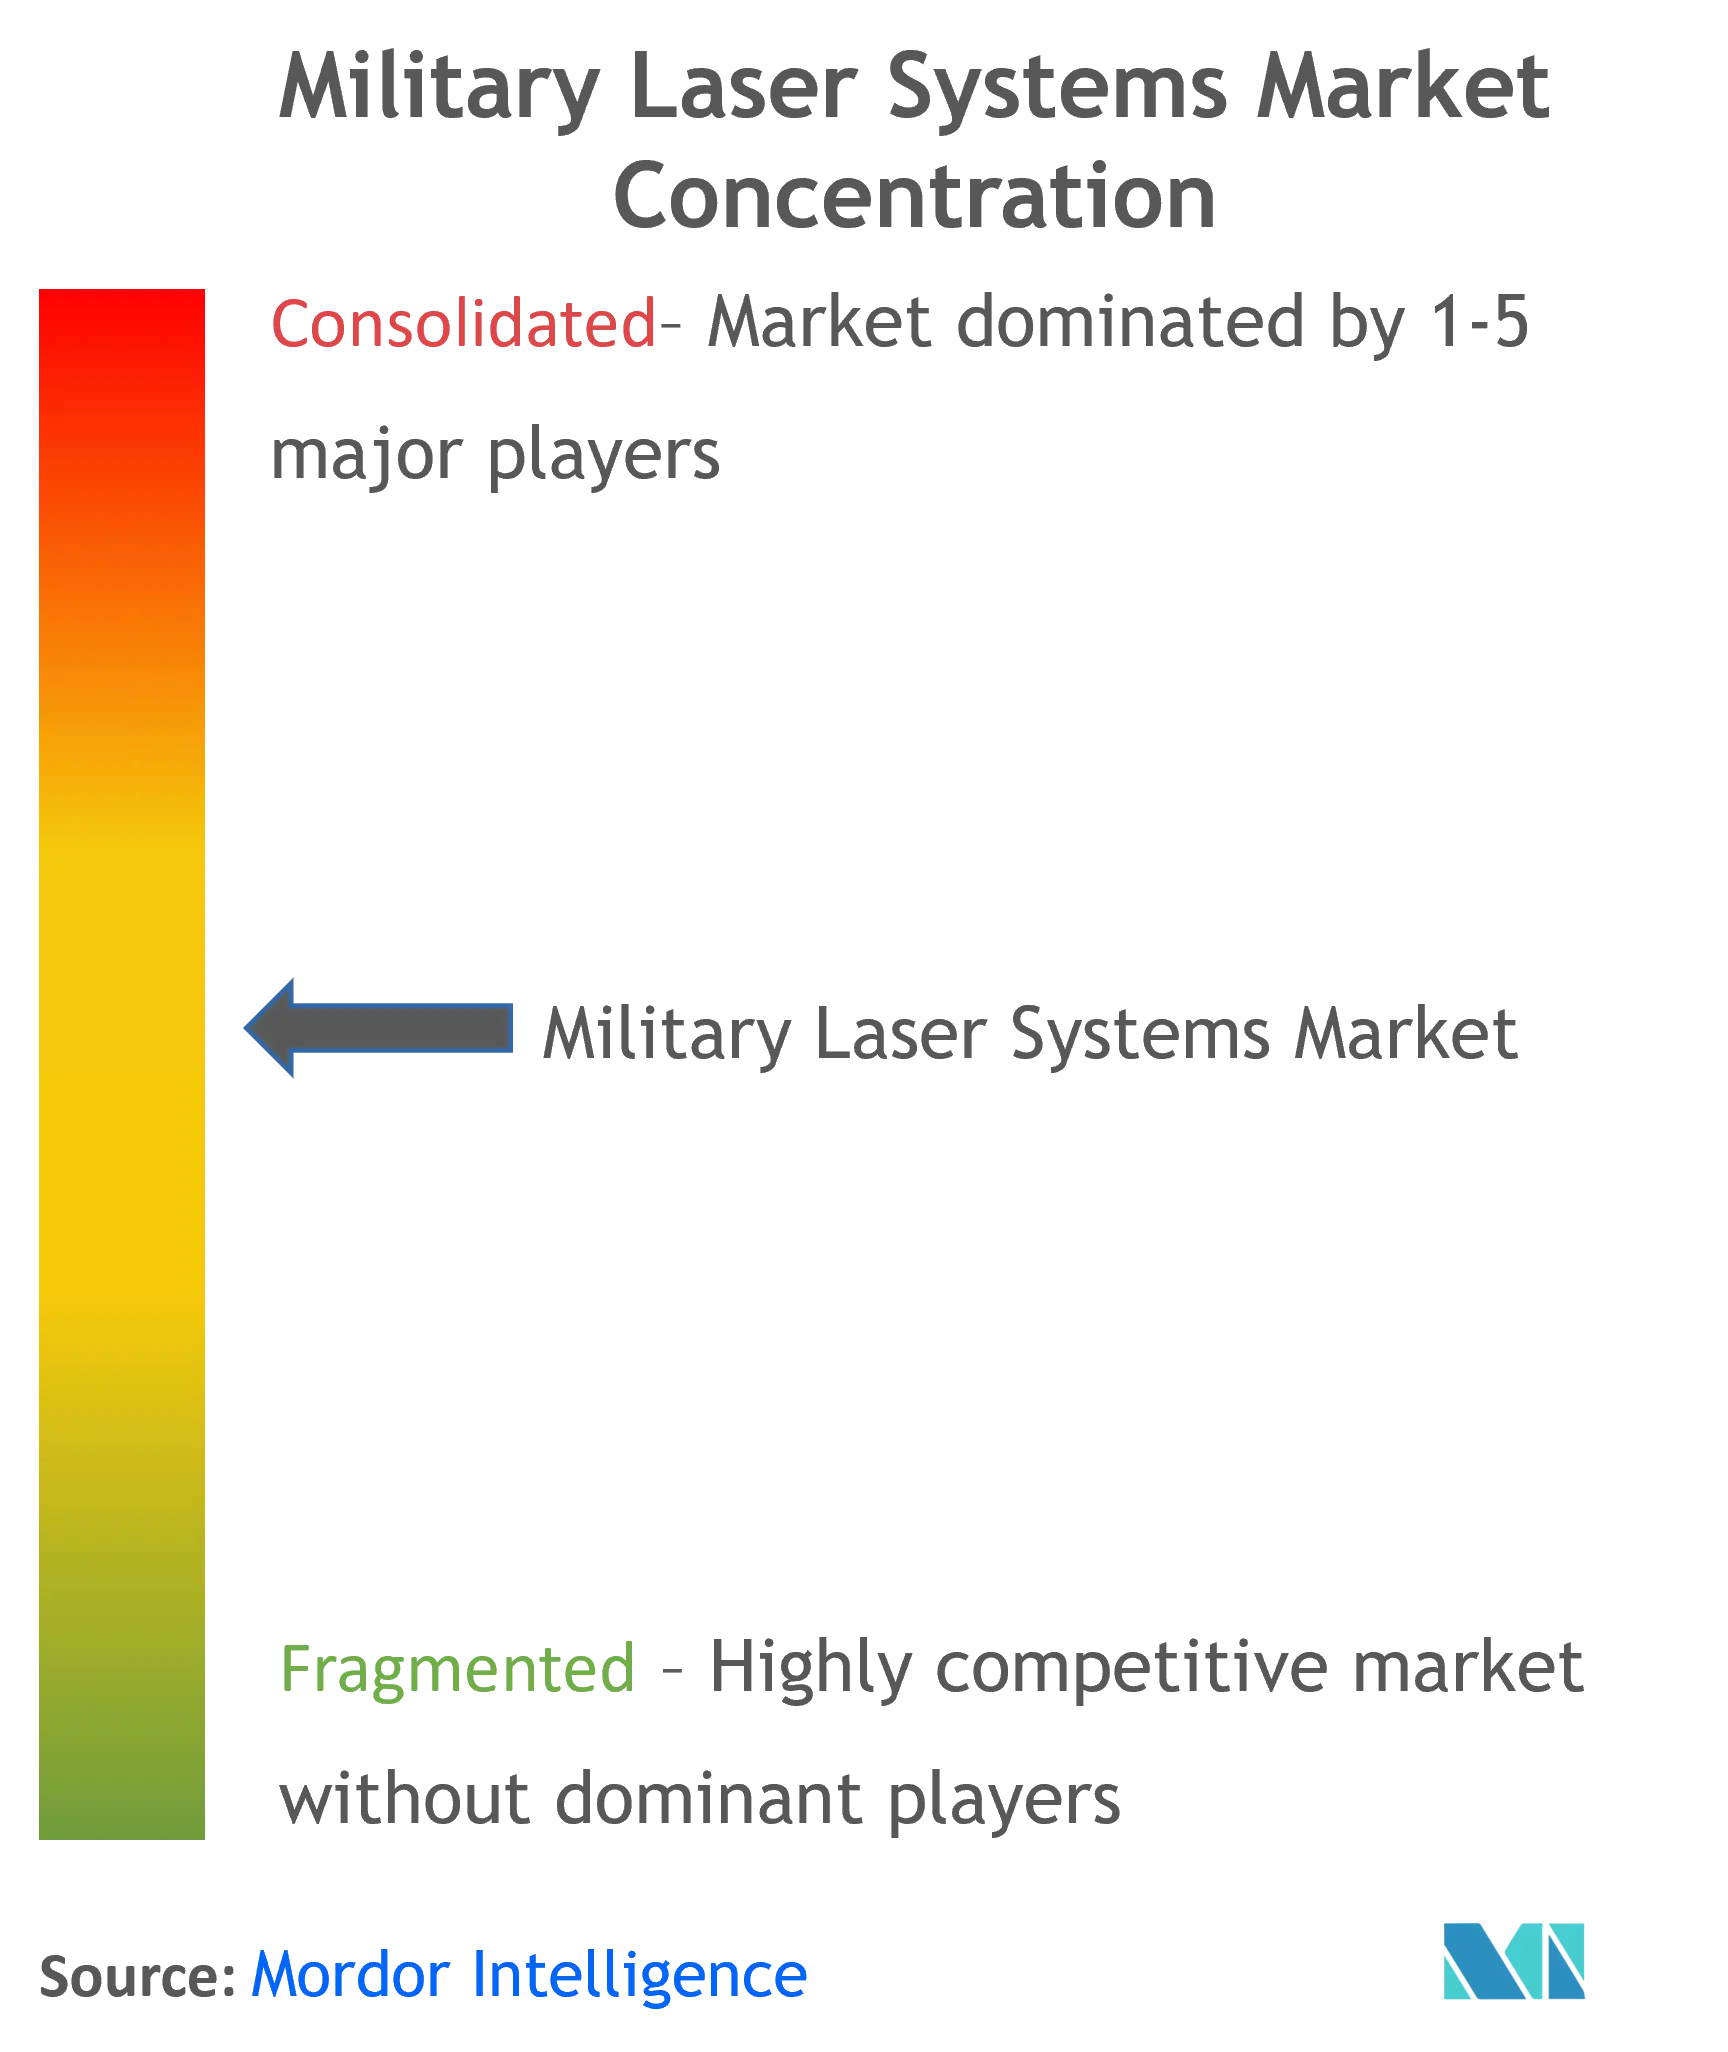 Military Laser Systems Market Concentration